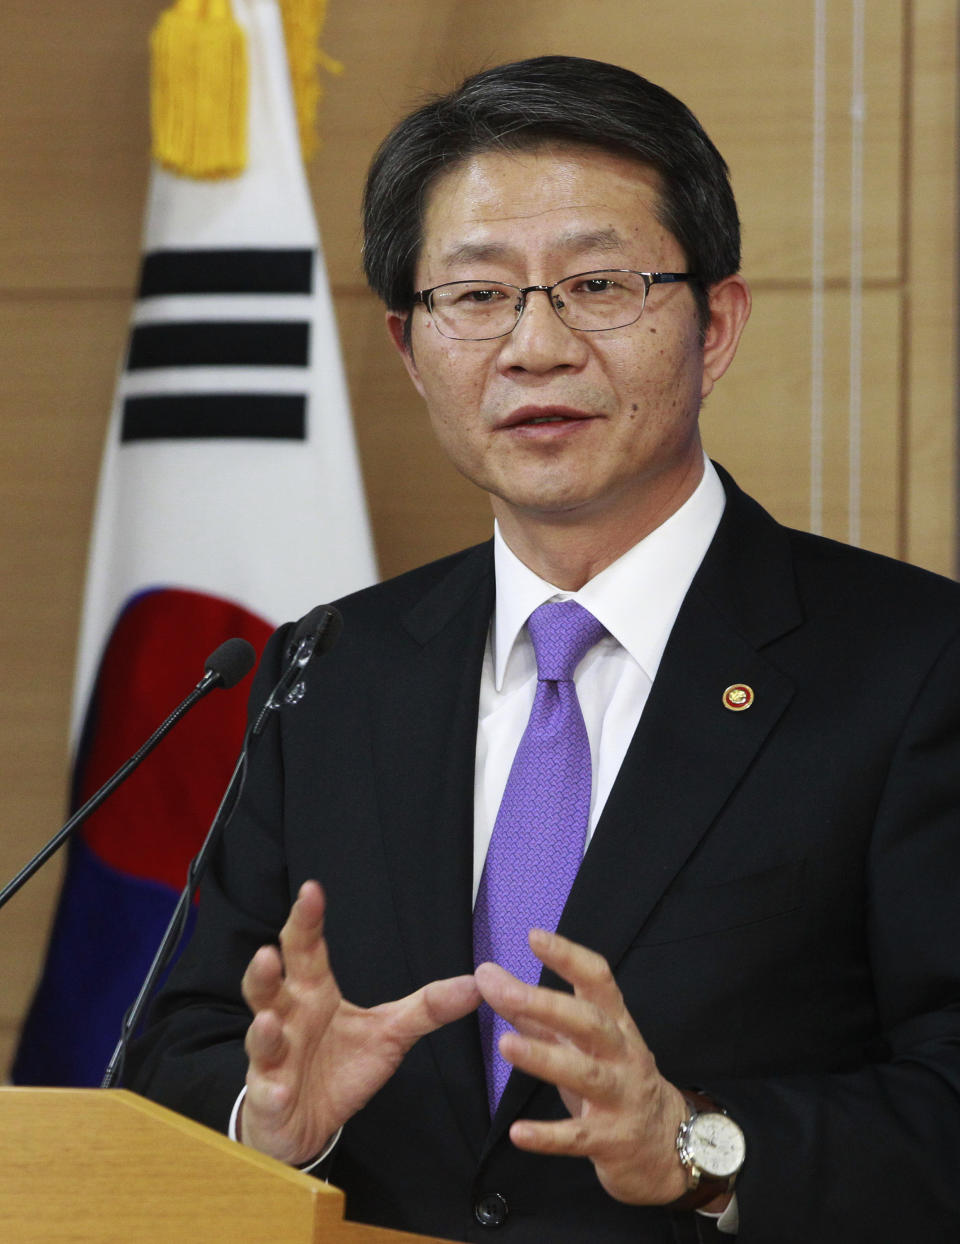 South Korean Unification Minister Ryoo Kihl-jae speaks during a press conference at the government complex in Seoul, South Korea, Thursday, Feb. 6, 2014. While North Korea is threatening to cancel a reunion of Korean War-divided families later this month only one day after agreeing on dates for the emotional meetings, Ryoo said that the agreement must be followed. (AP Photo/Ahn Young-joon)